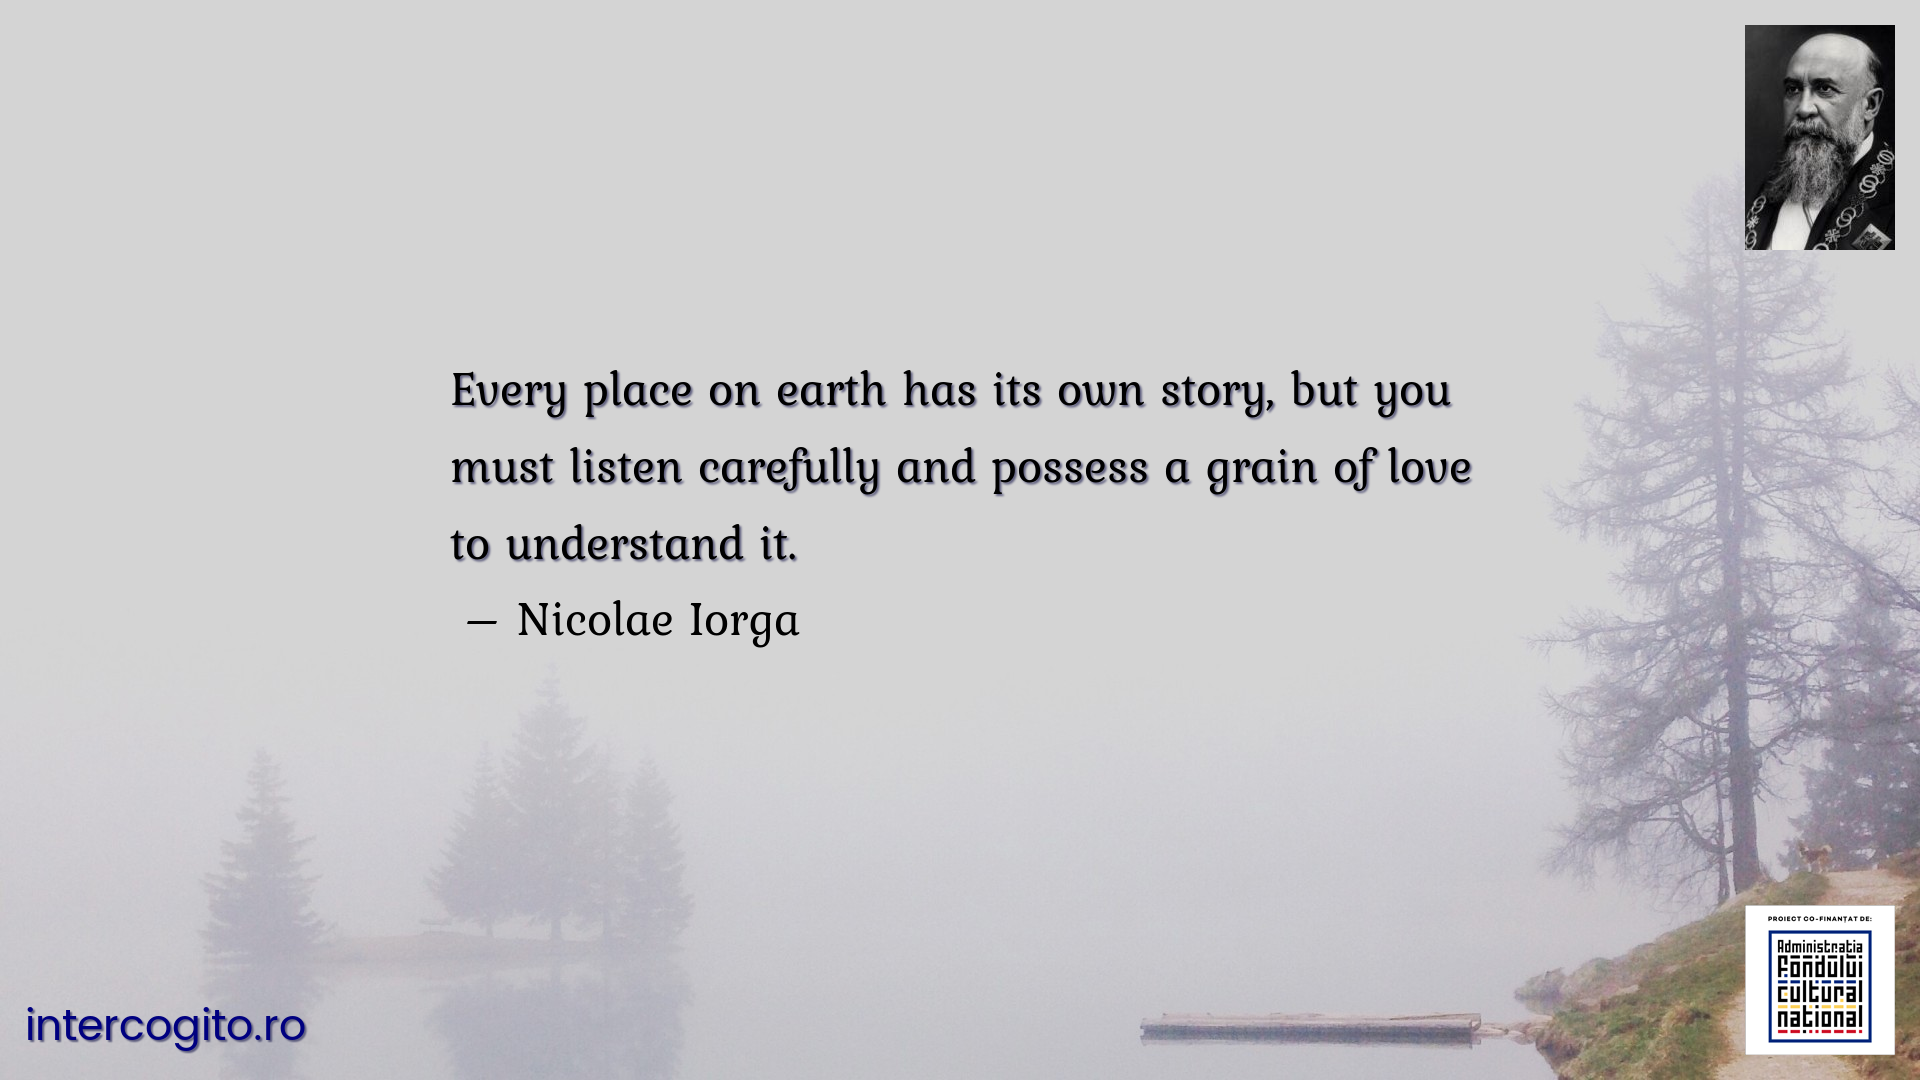 Every place on earth has its own story, but you must listen carefully and possess a grain of love to understand it.